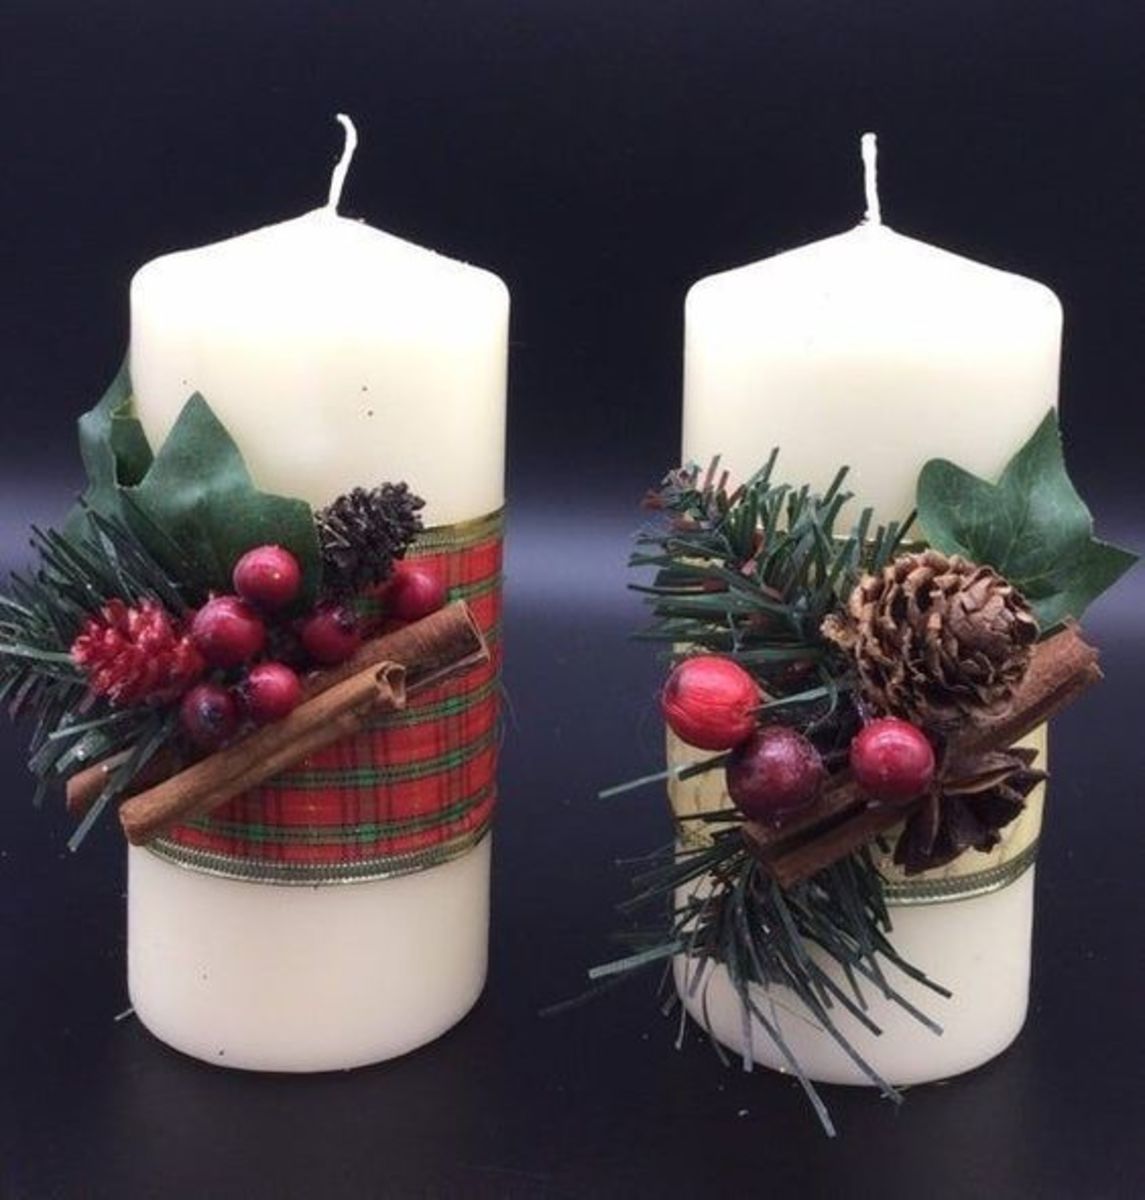 Wrap white candles with burlap and holly.